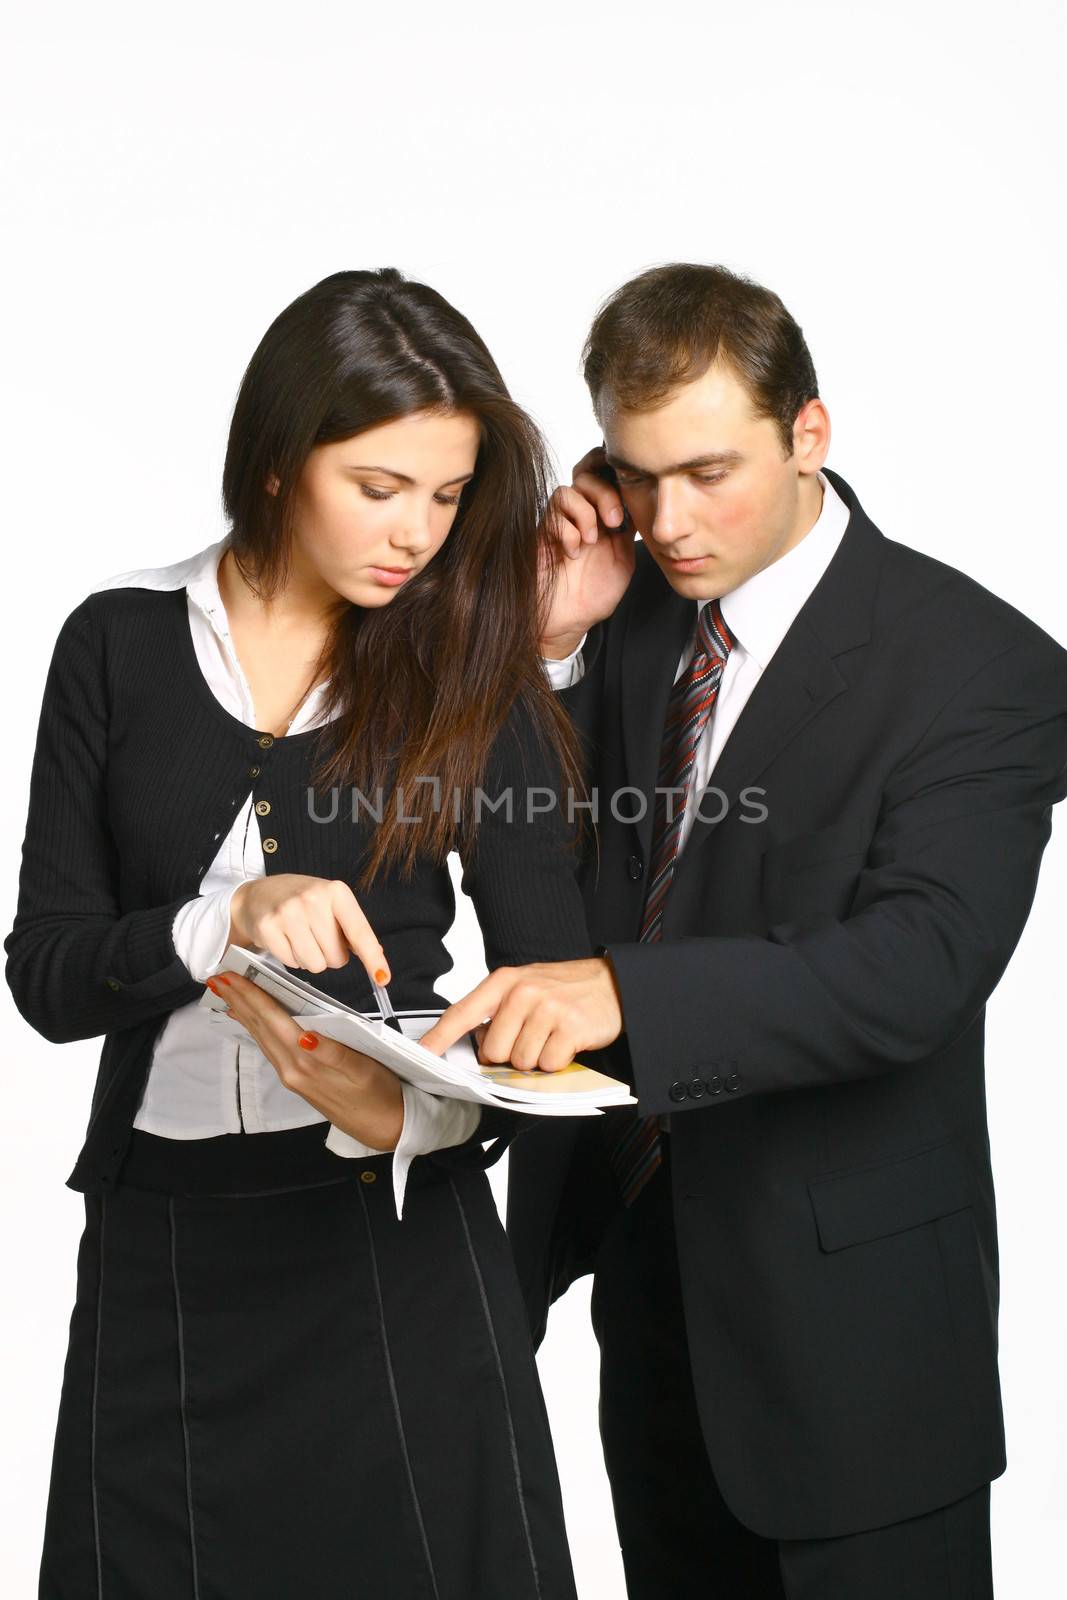 The chief dictates something to the secretary and it writes down